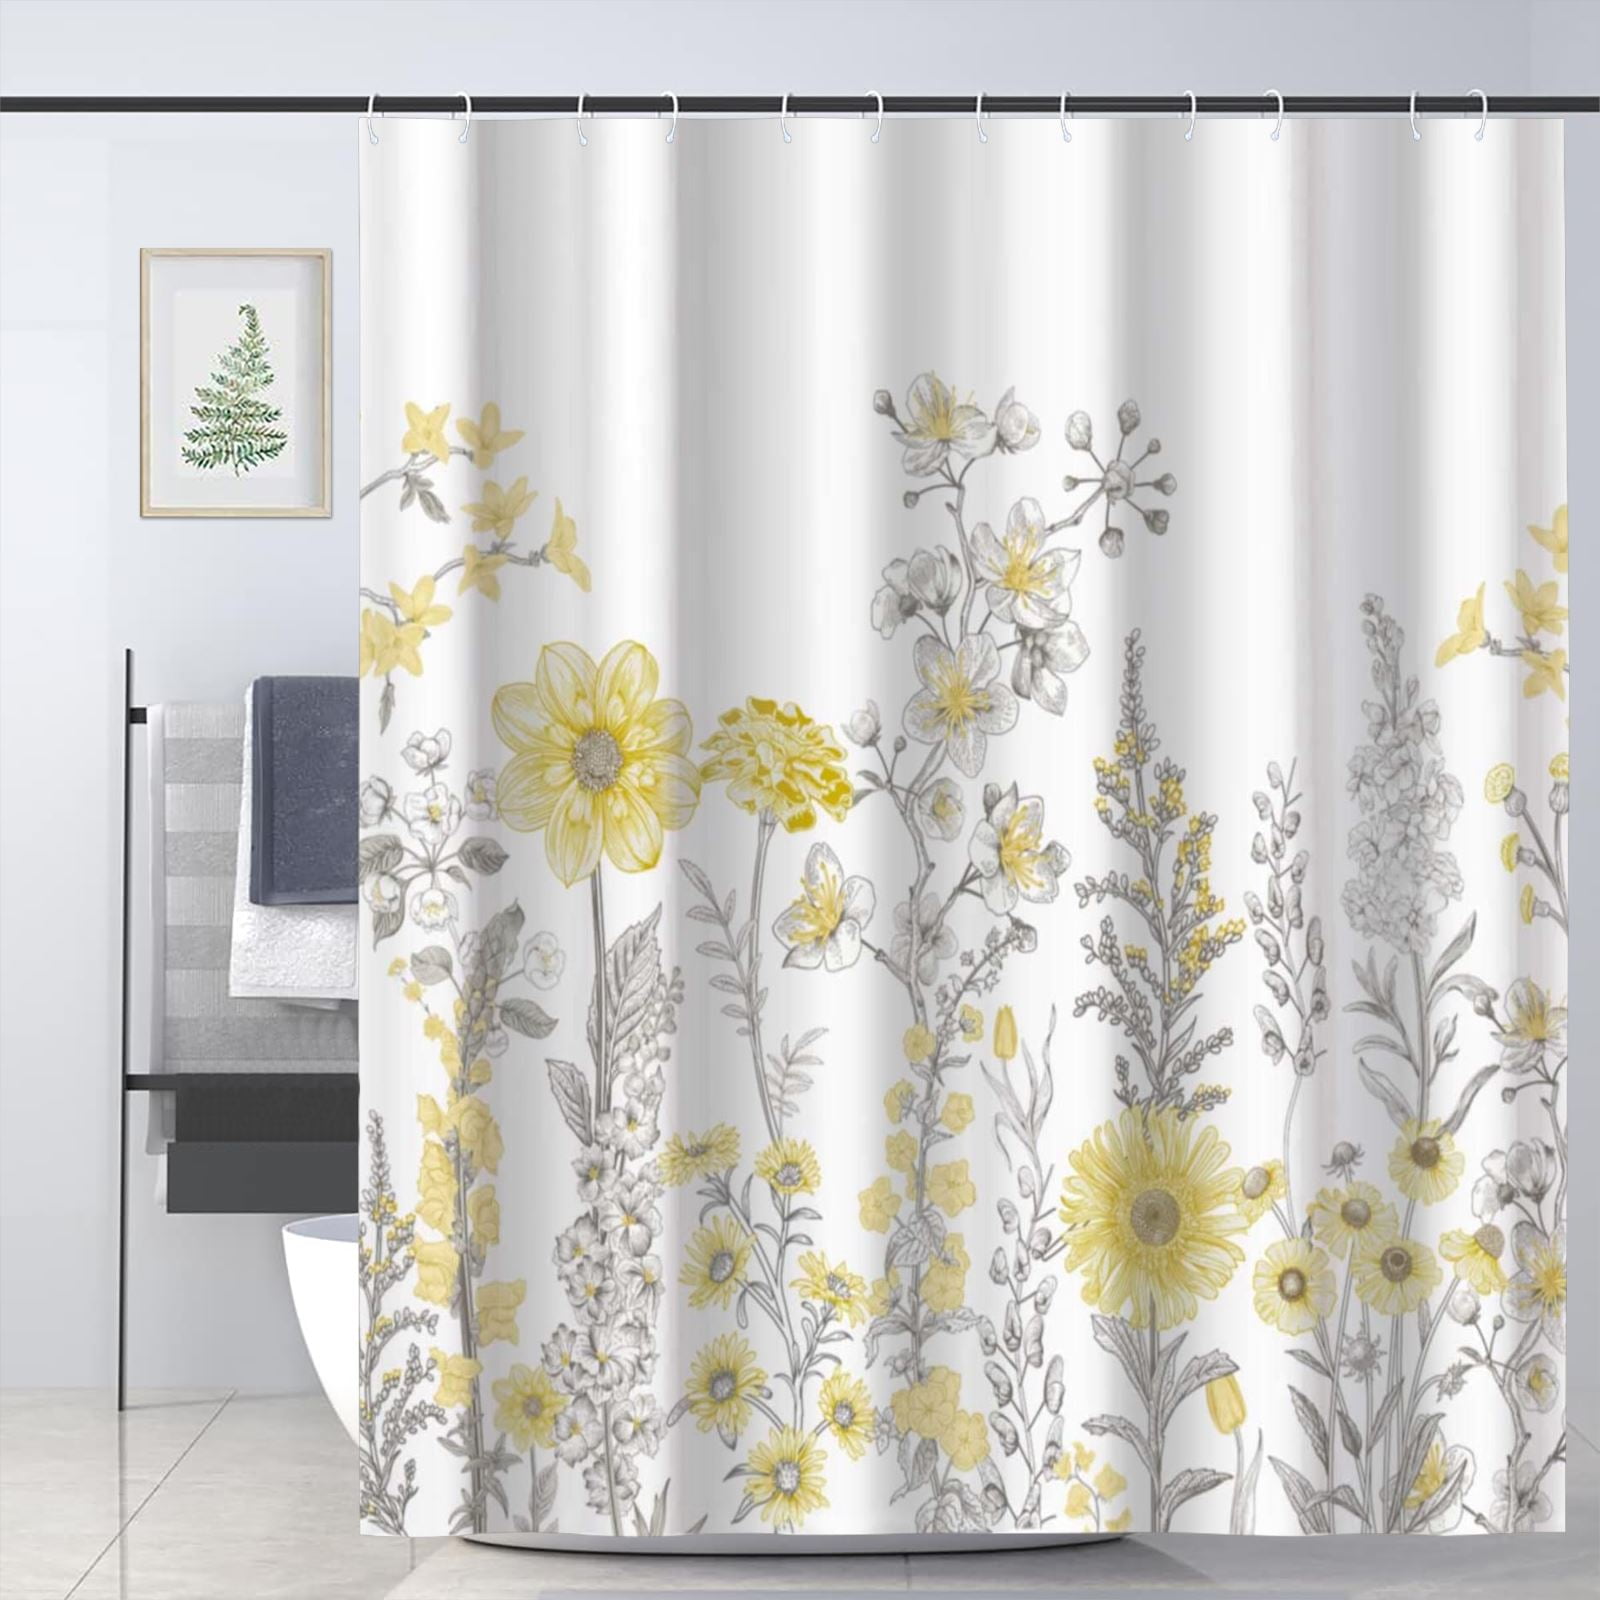 Vines and Yellow Flowers on The Wall Fabric Shower Curtain Bathroom Set 12Hooks 